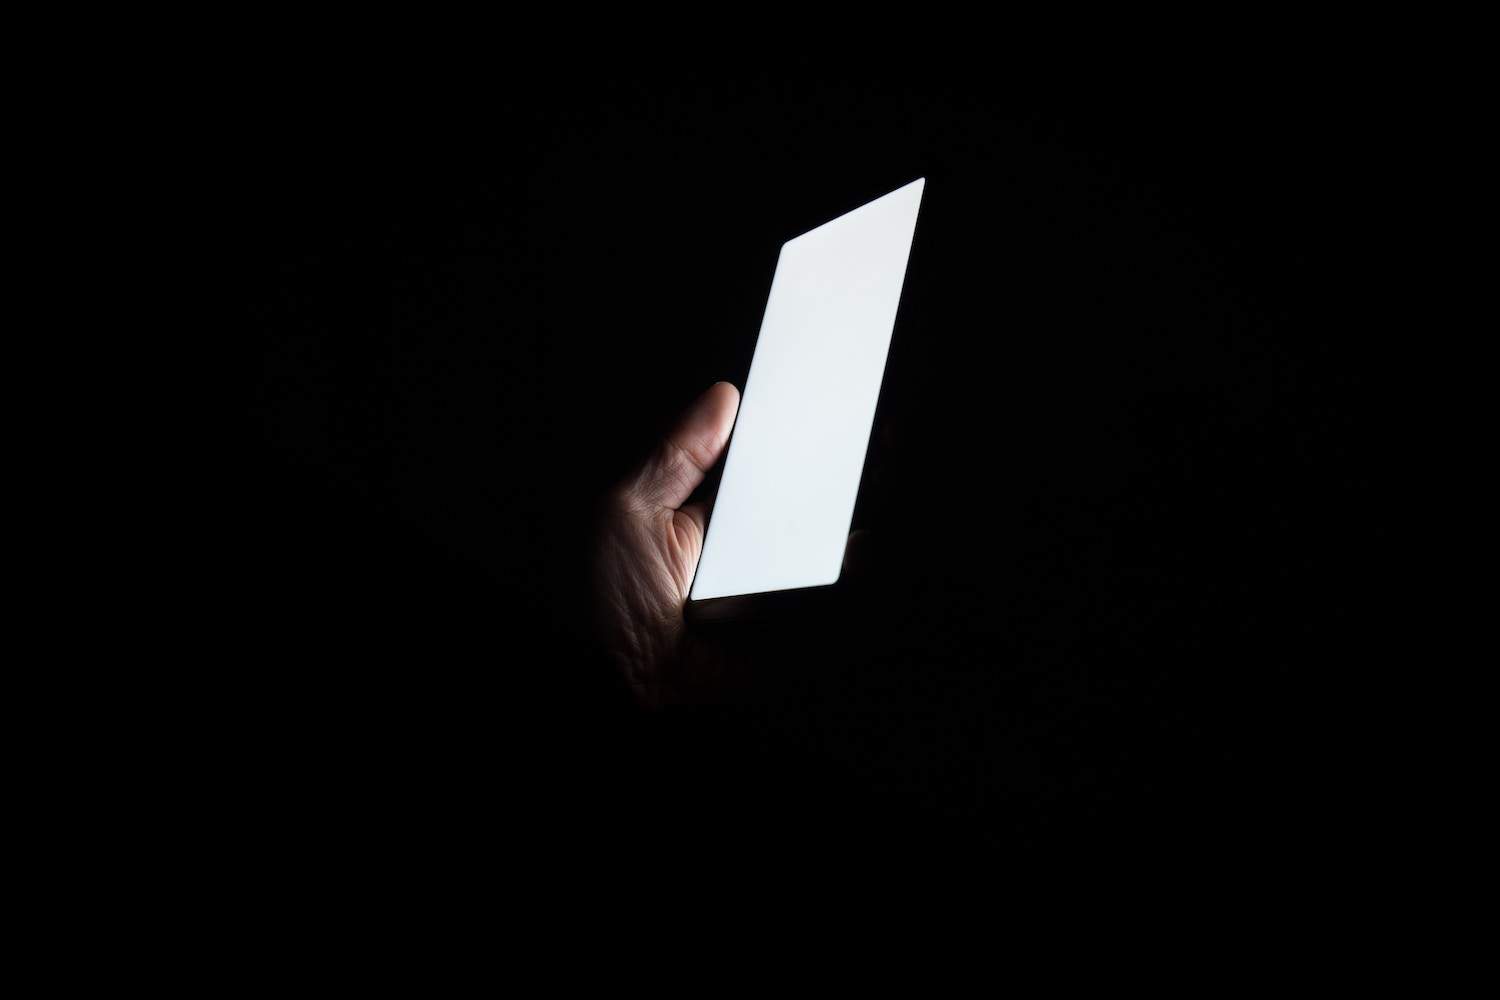 Hand holding up bright smartphone screen in pitch black room after flotation session